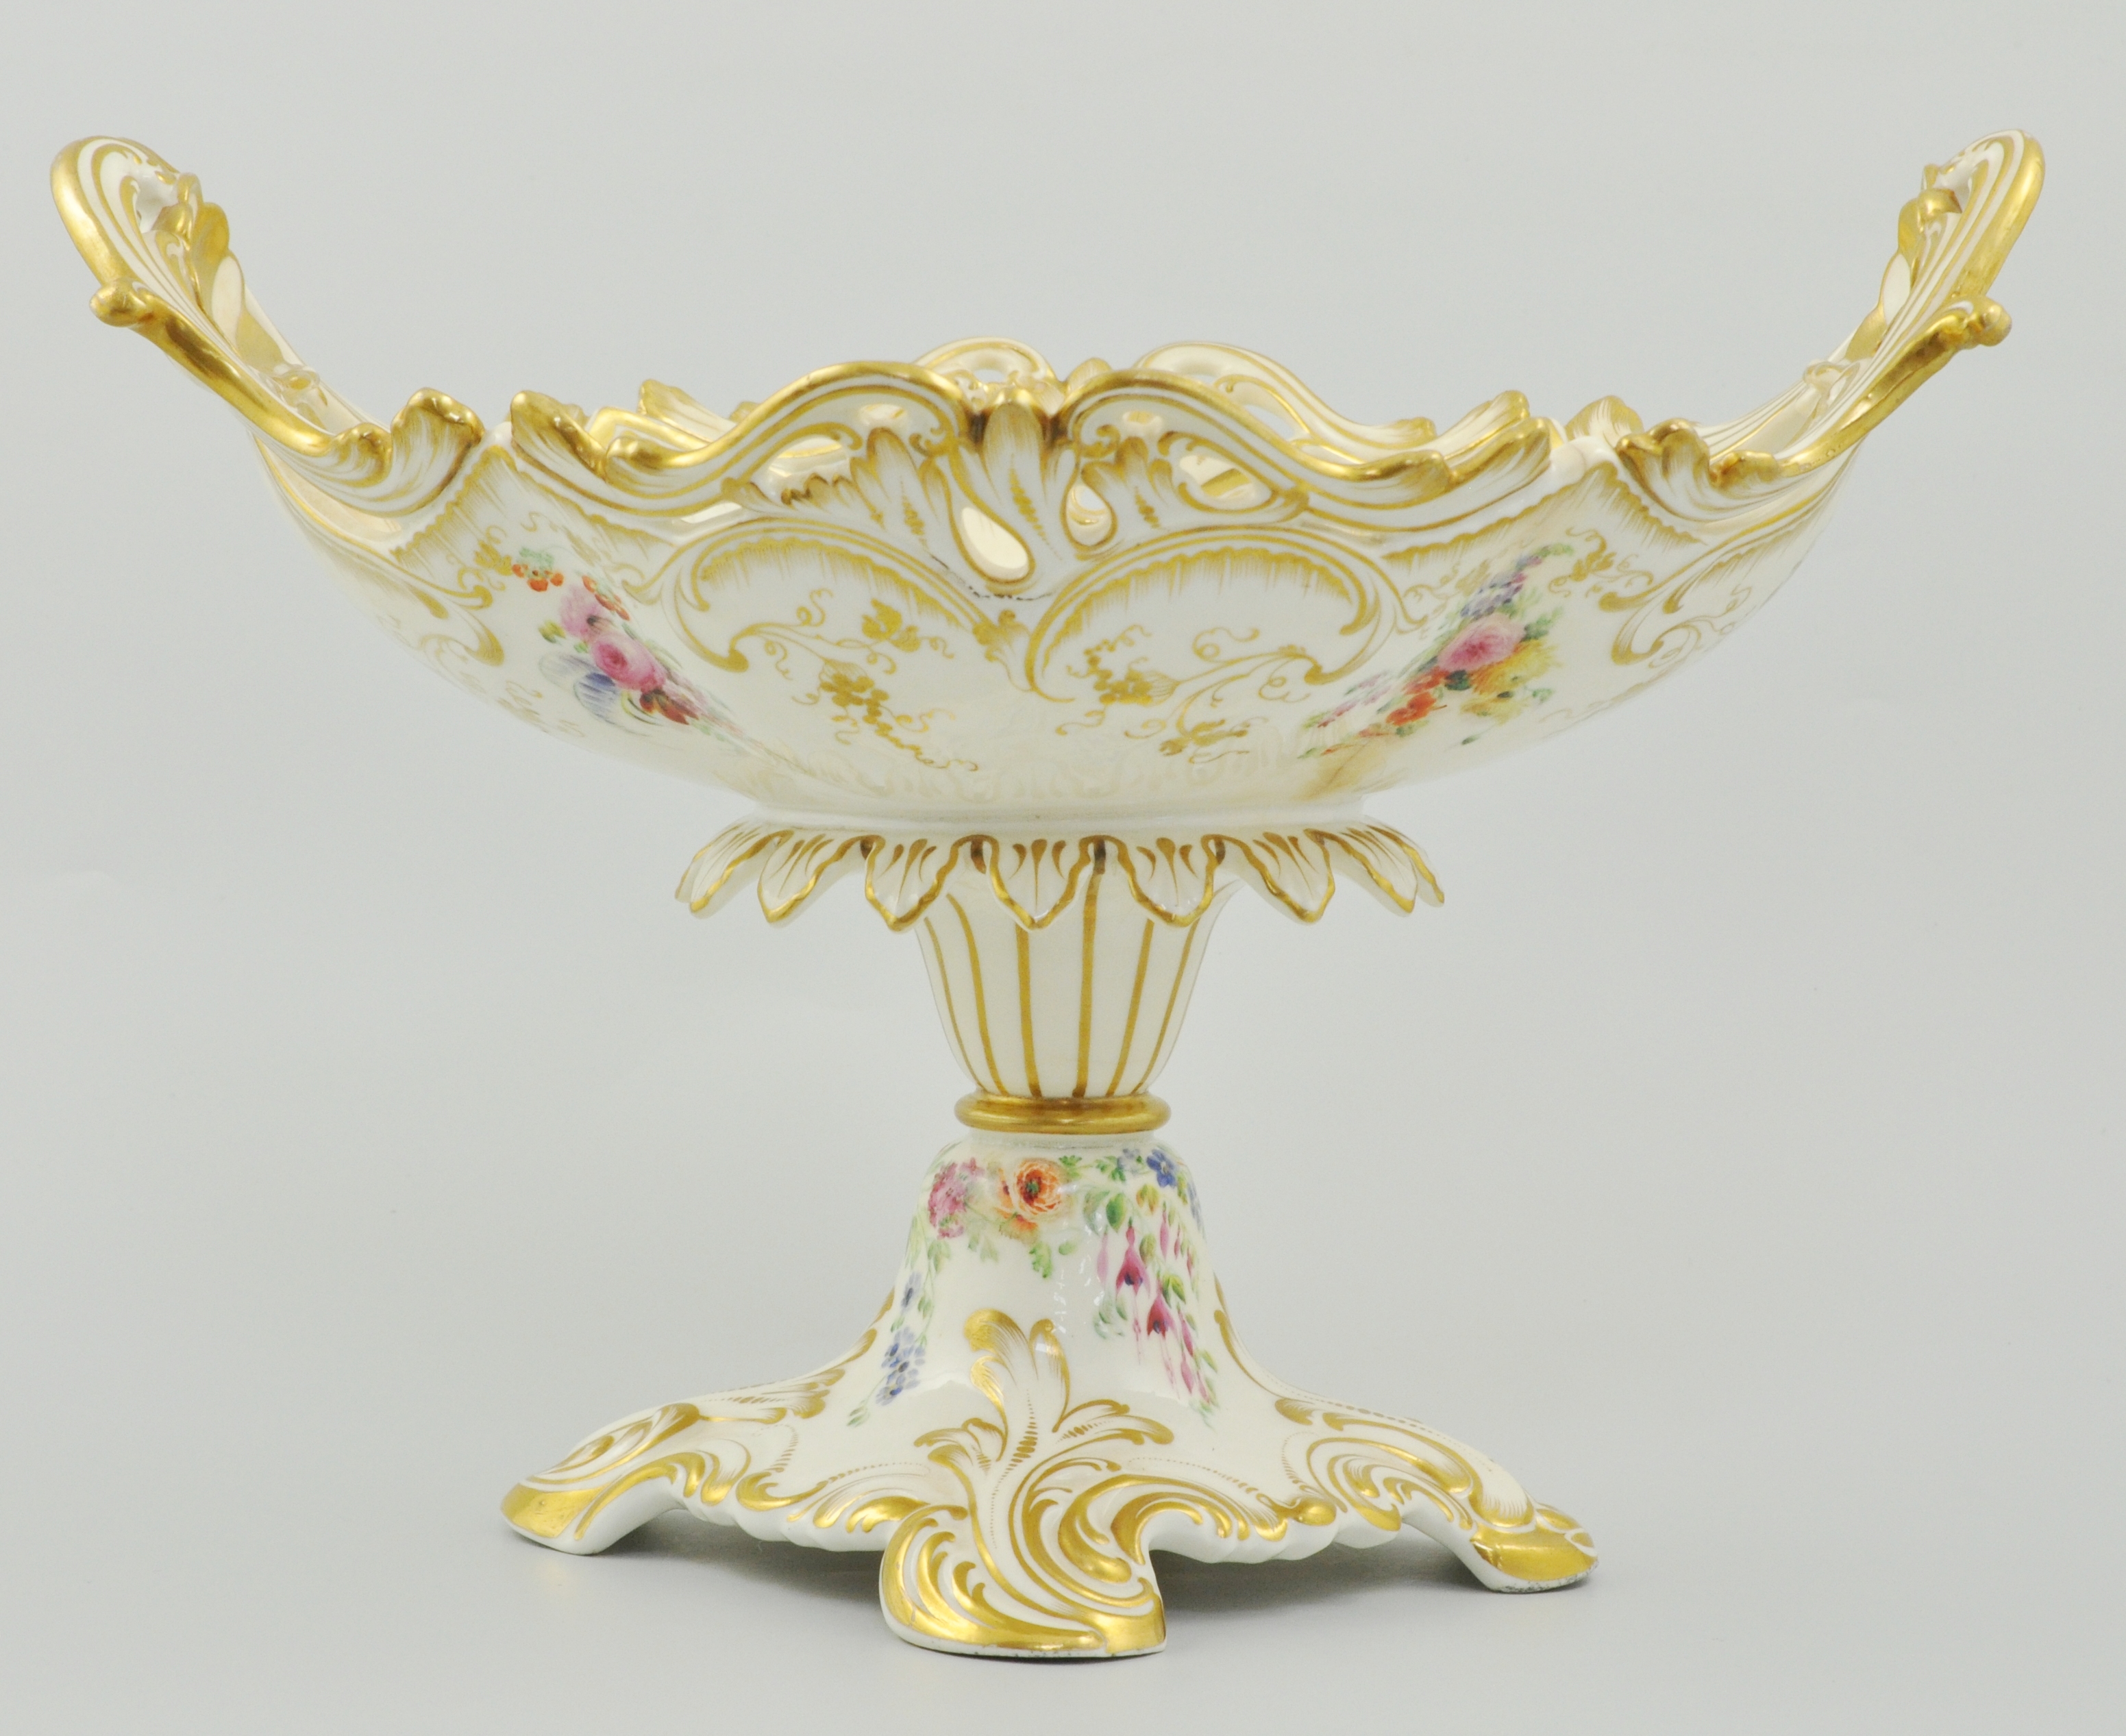 Rockingham style comport, florally decorated, with a stylised gilt border, height 21cm.